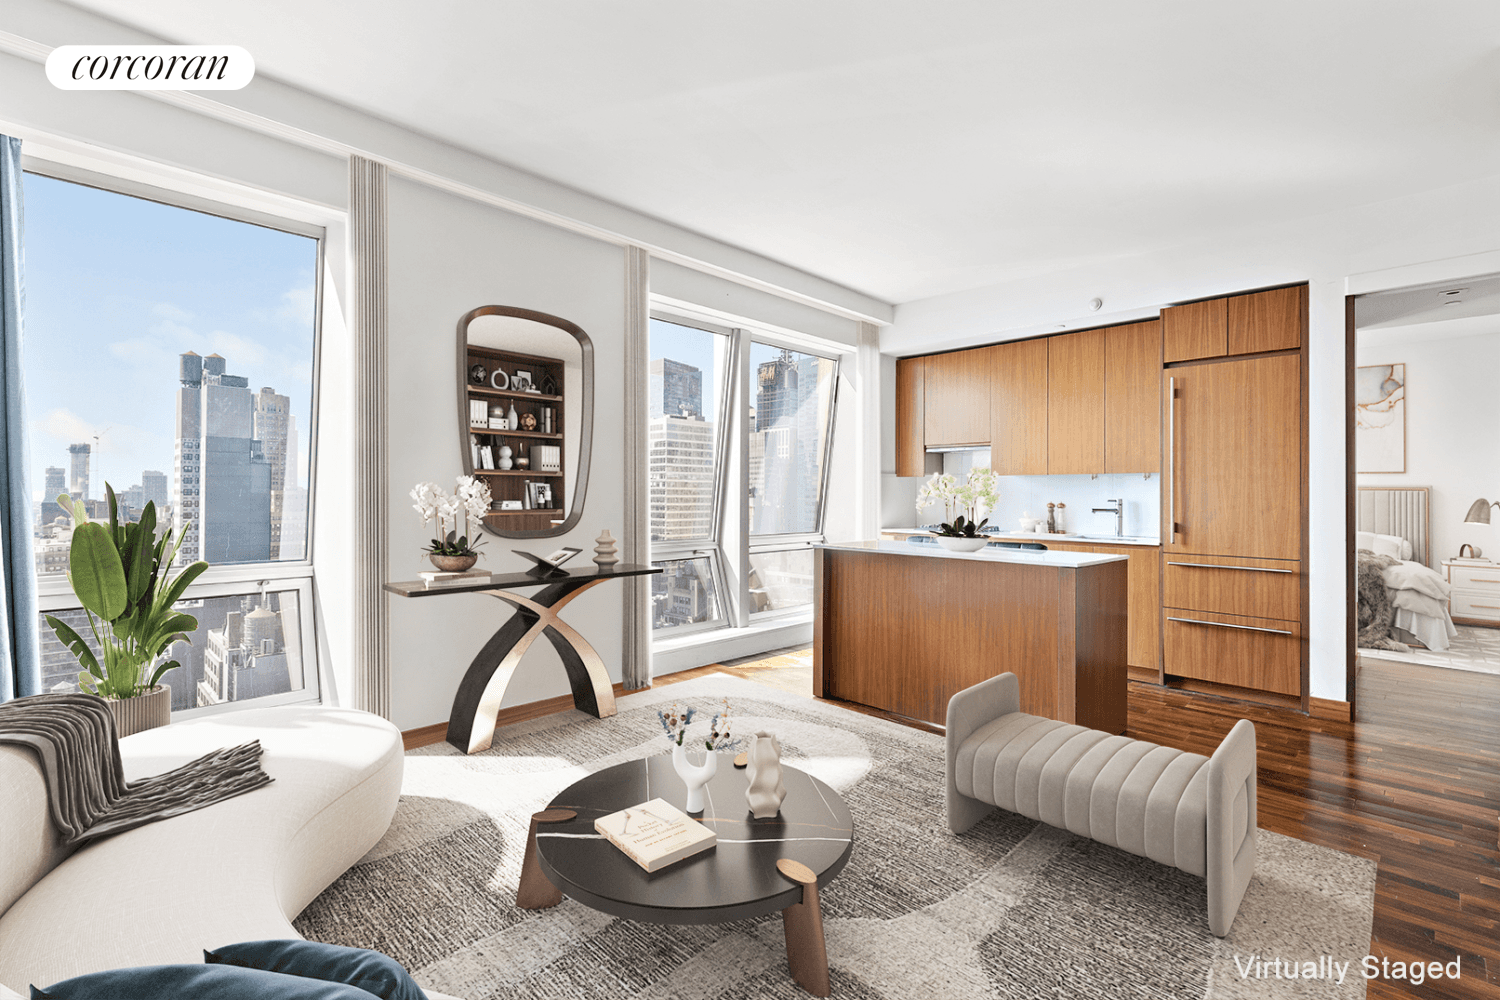 Unit 32G is a special one bedroom, one and a half bathroom apartment located in The Langham Fifth Avenue one of Manhattan's most desired properties.